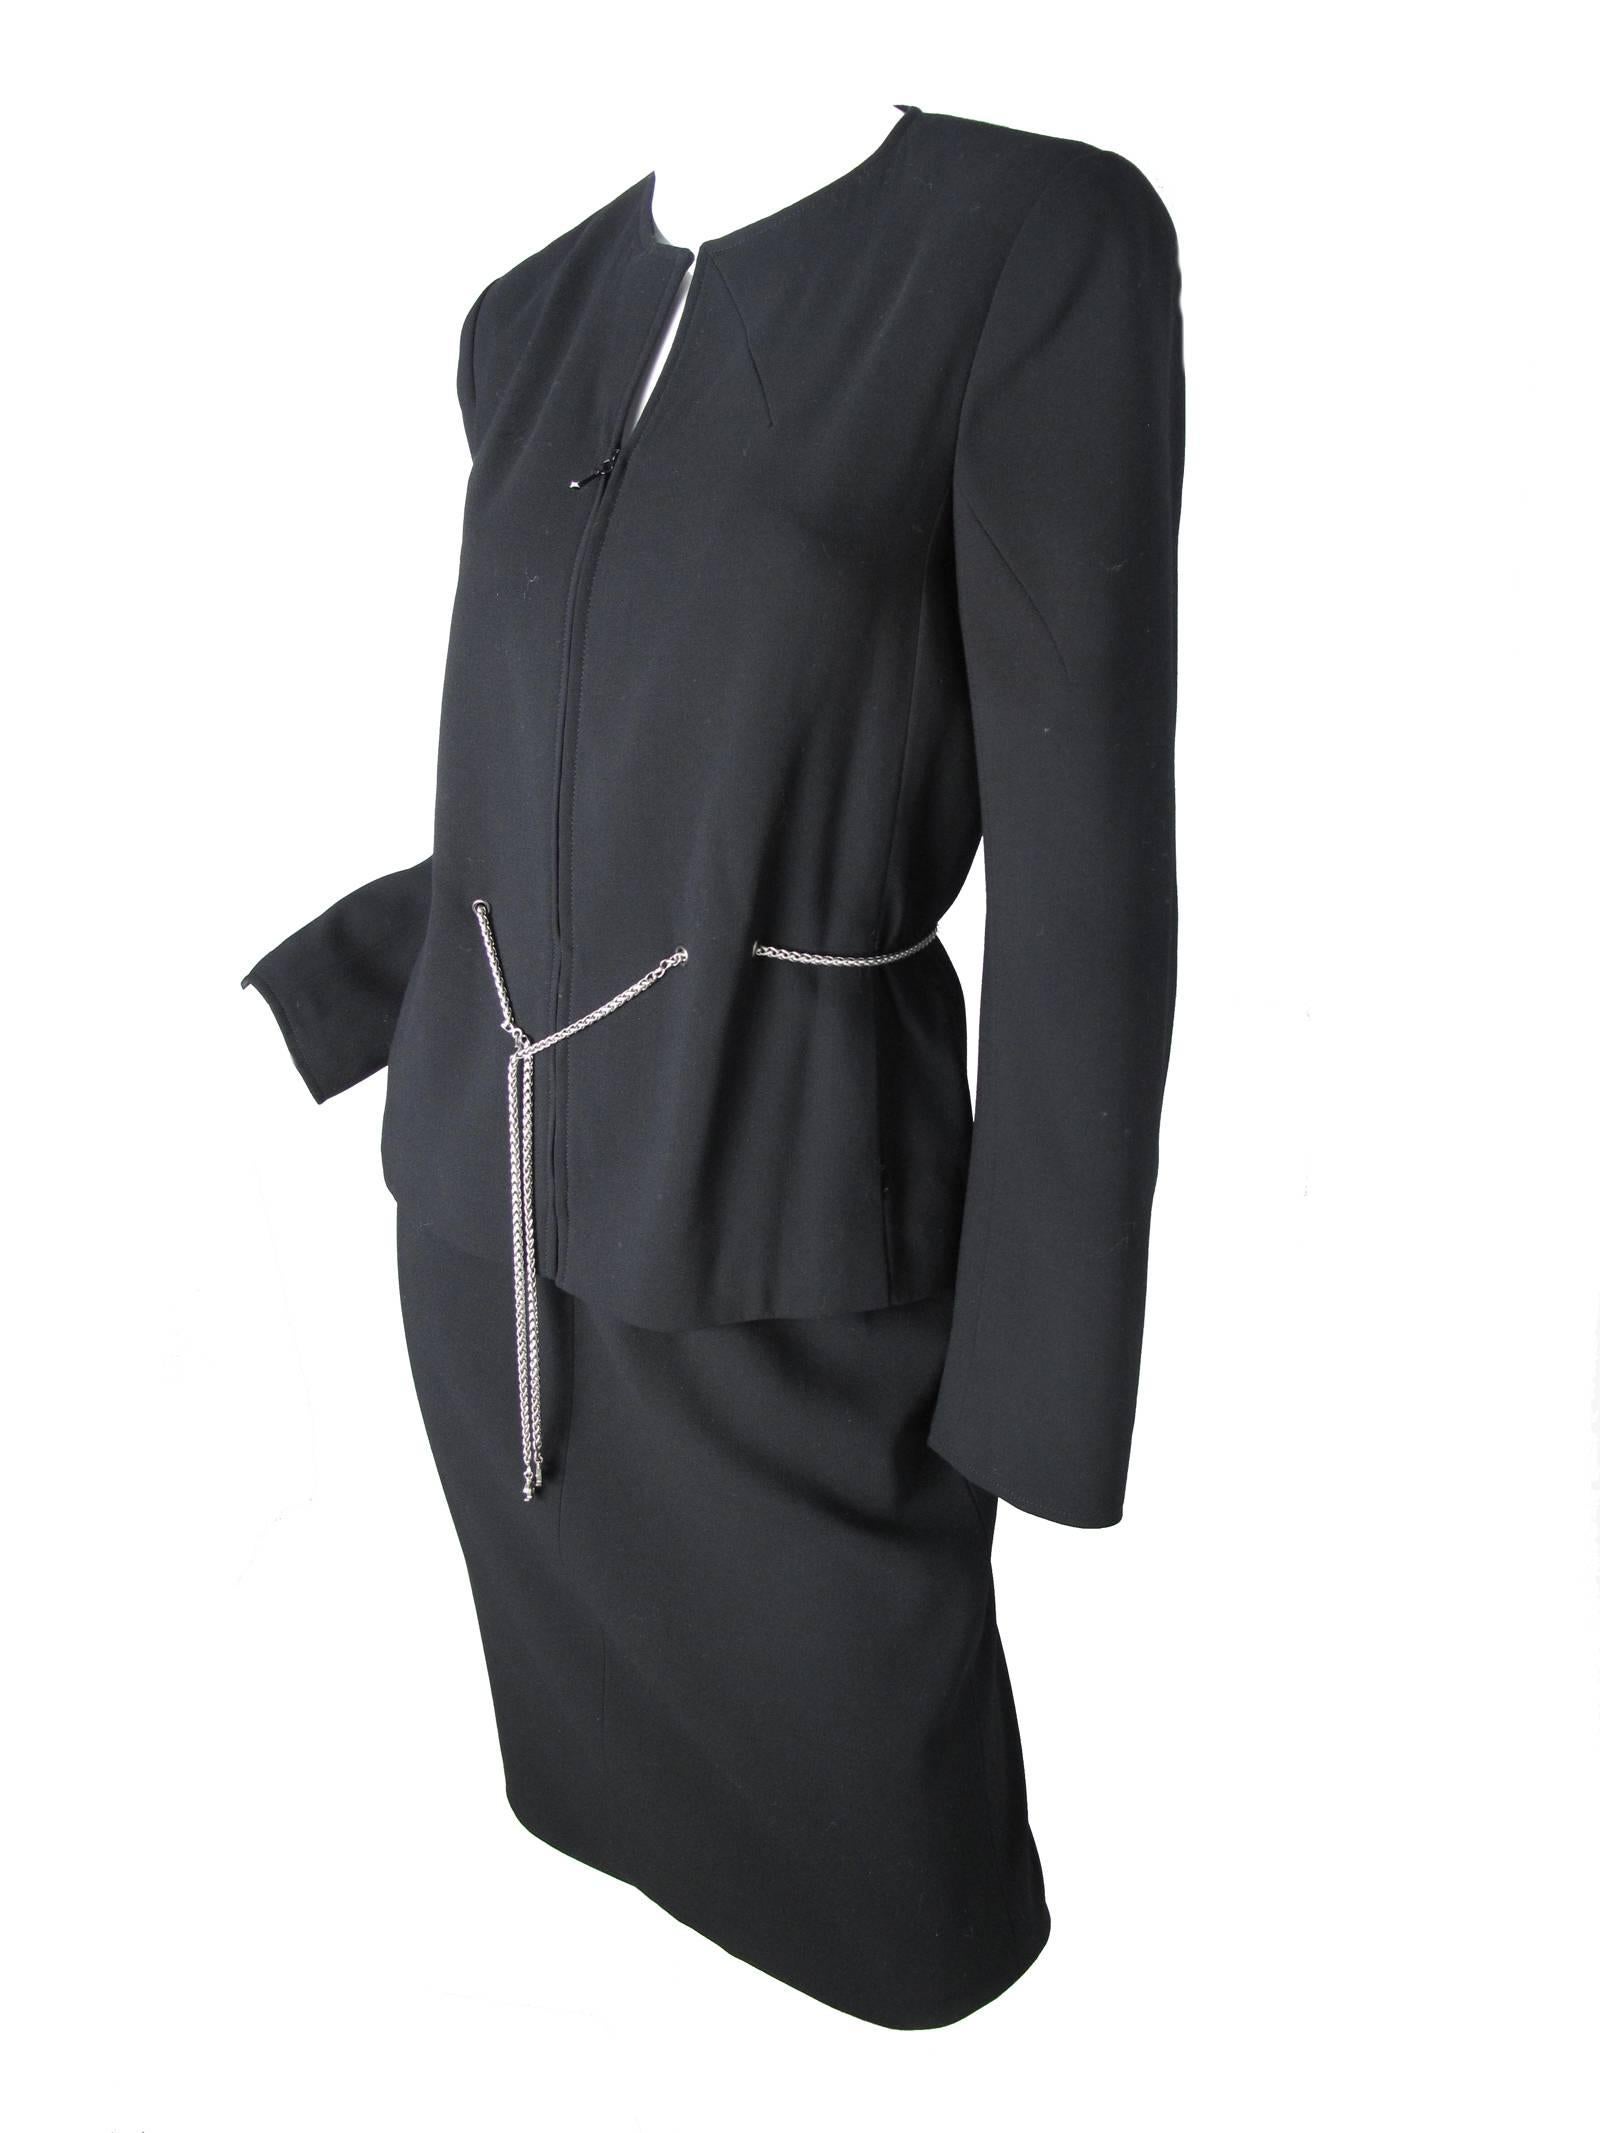 1998 Chanel black wool crepe skirt suit with drawstring silver 